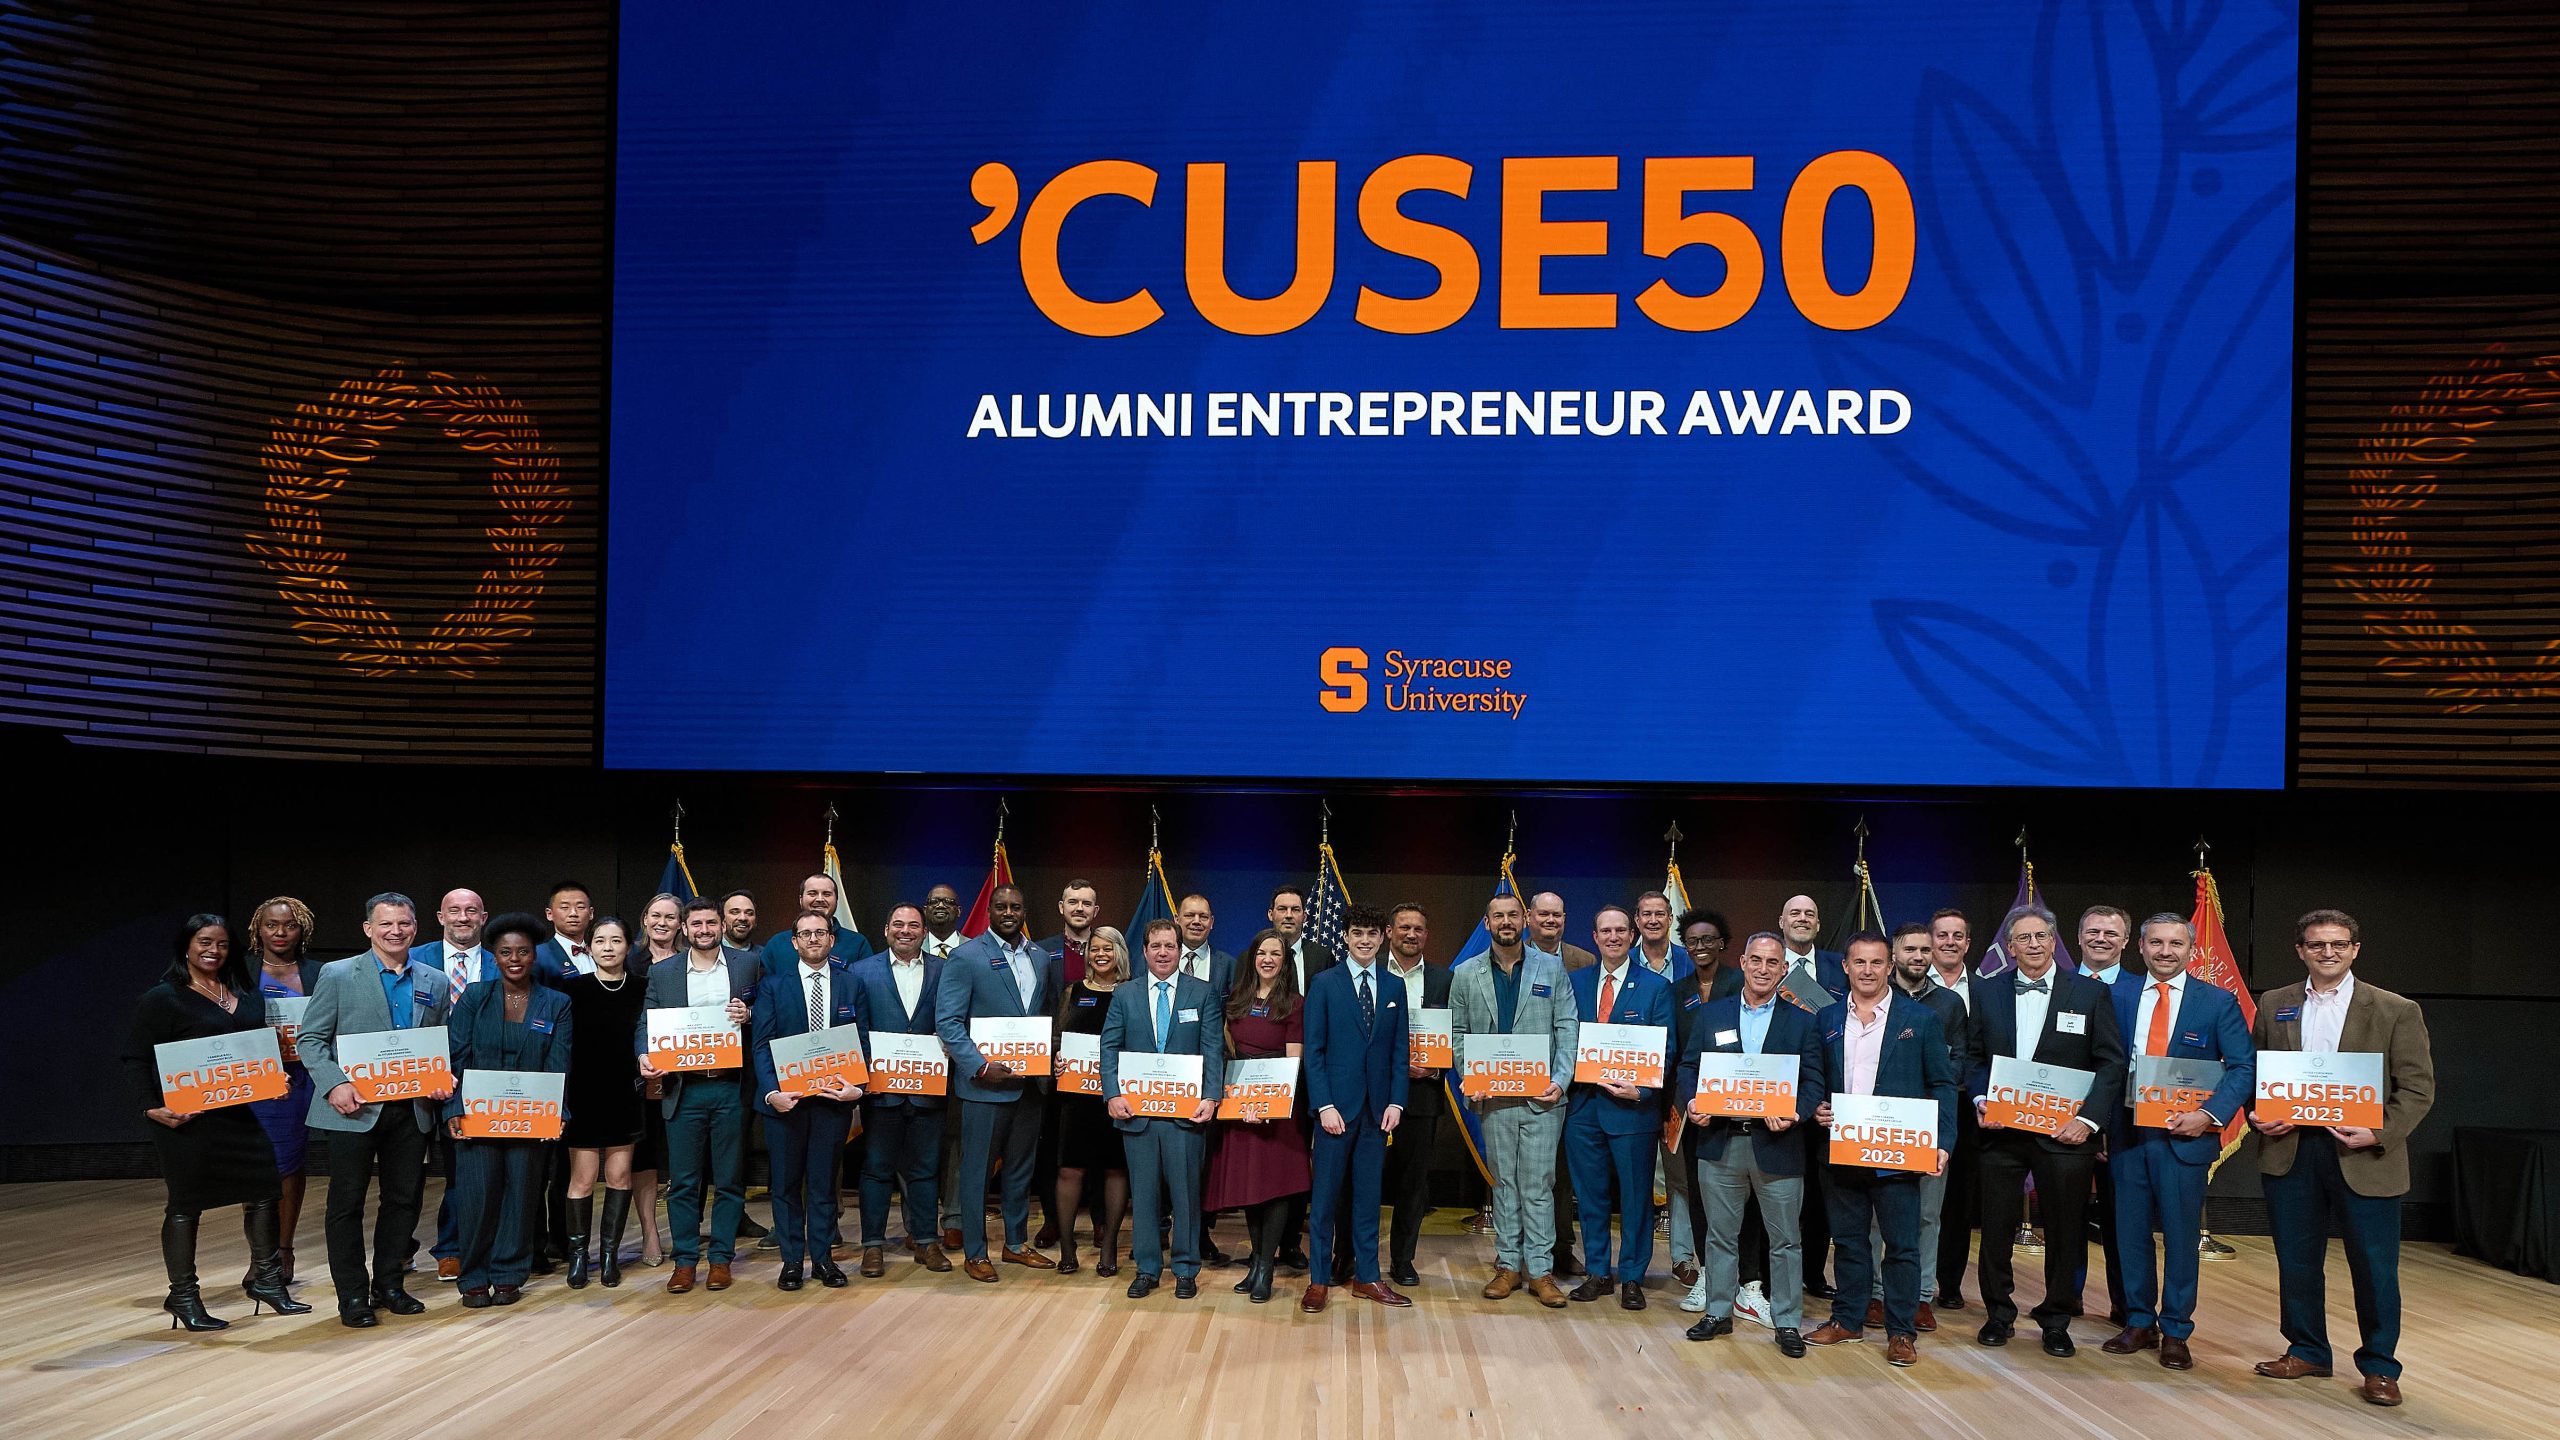 Large group of people on a stage with a large blue screen that says ’CUSE50 Alumni Entrepreneur Award